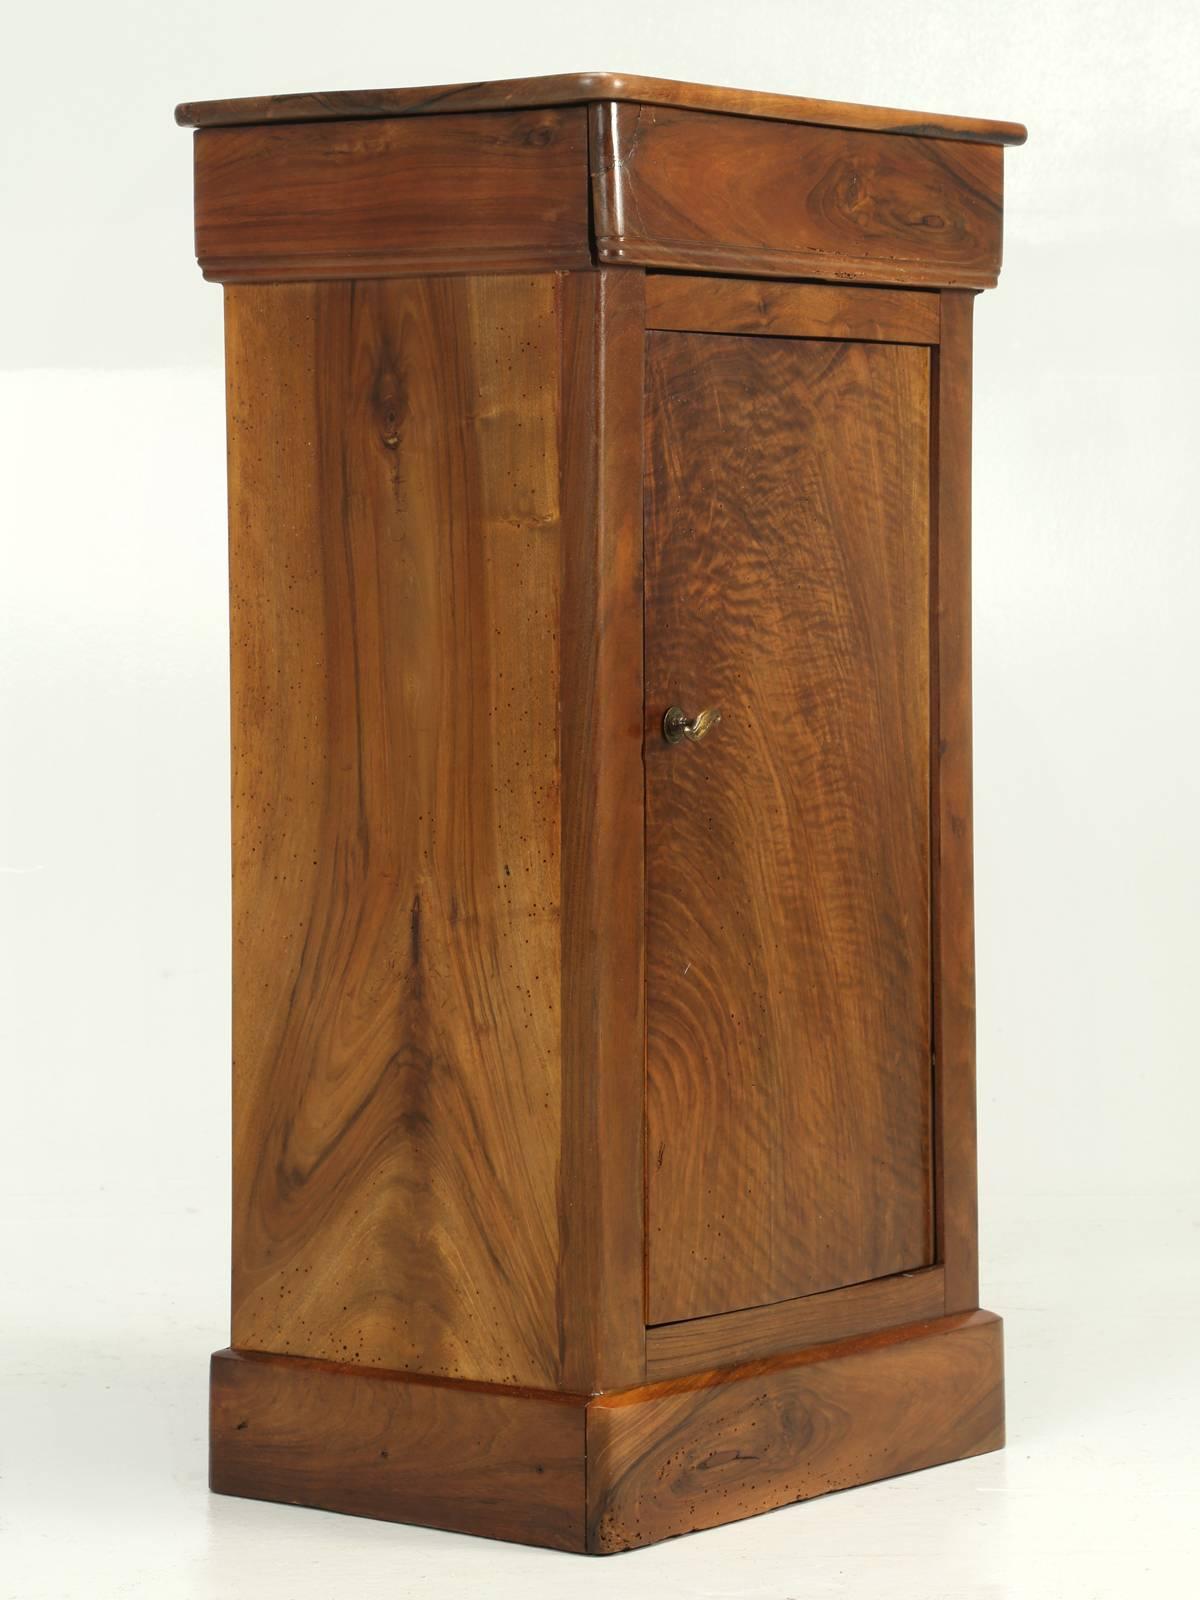 Antique French Louis Philippe style nightstand in a beautiful walnut that we just completed French polishing. Single drawer and door. This small night stand has exquisite graining in the walnut.